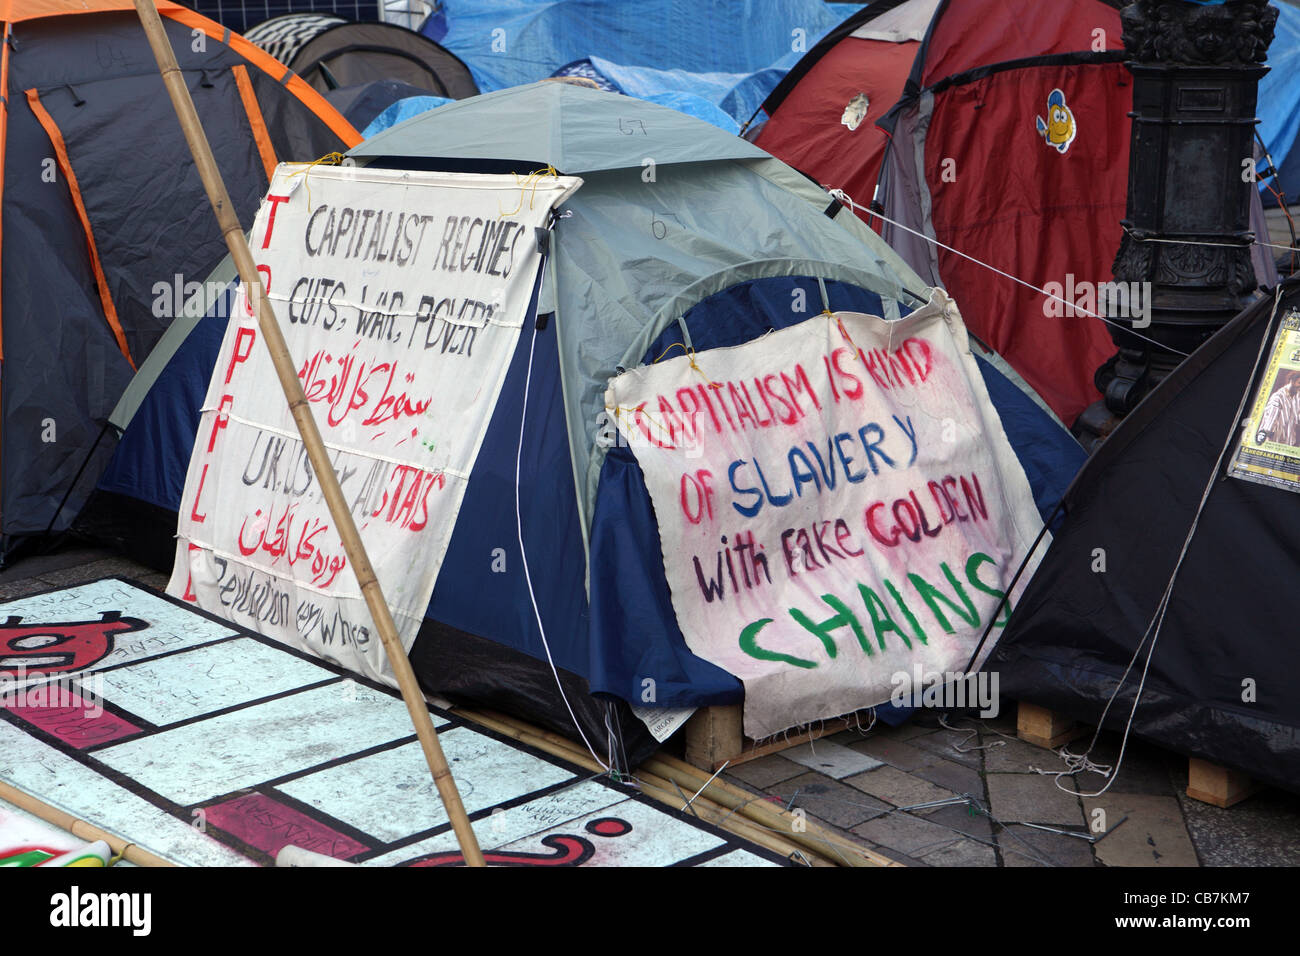 image of one of the many tents at the Occupy London protest St Paul's London, UK - anti capitalism slogans Stock Photo